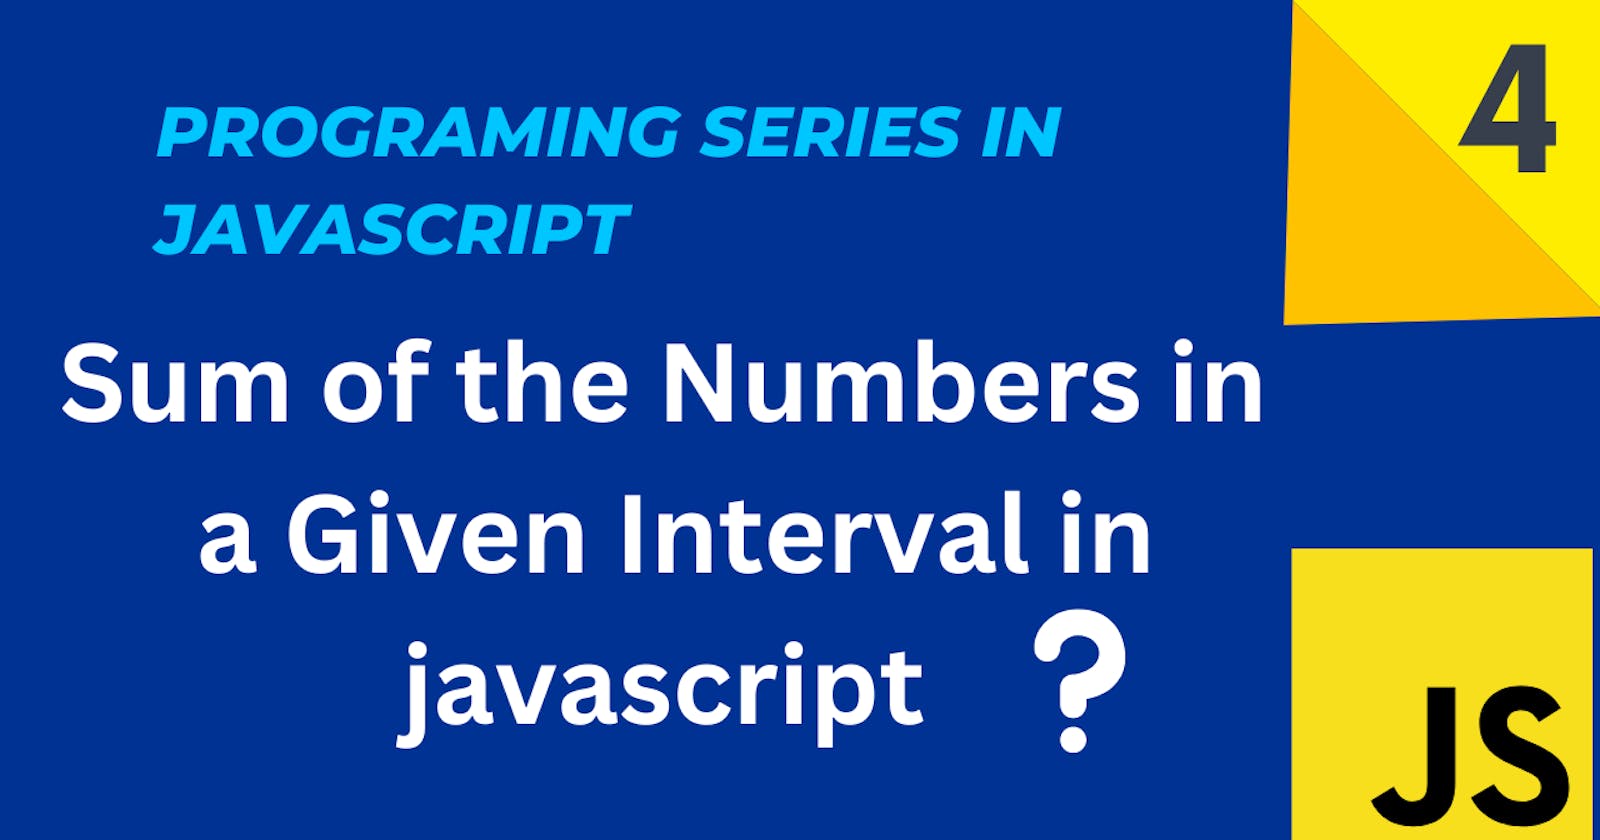 The sum of the Numbers in a Given Interval in Javascript